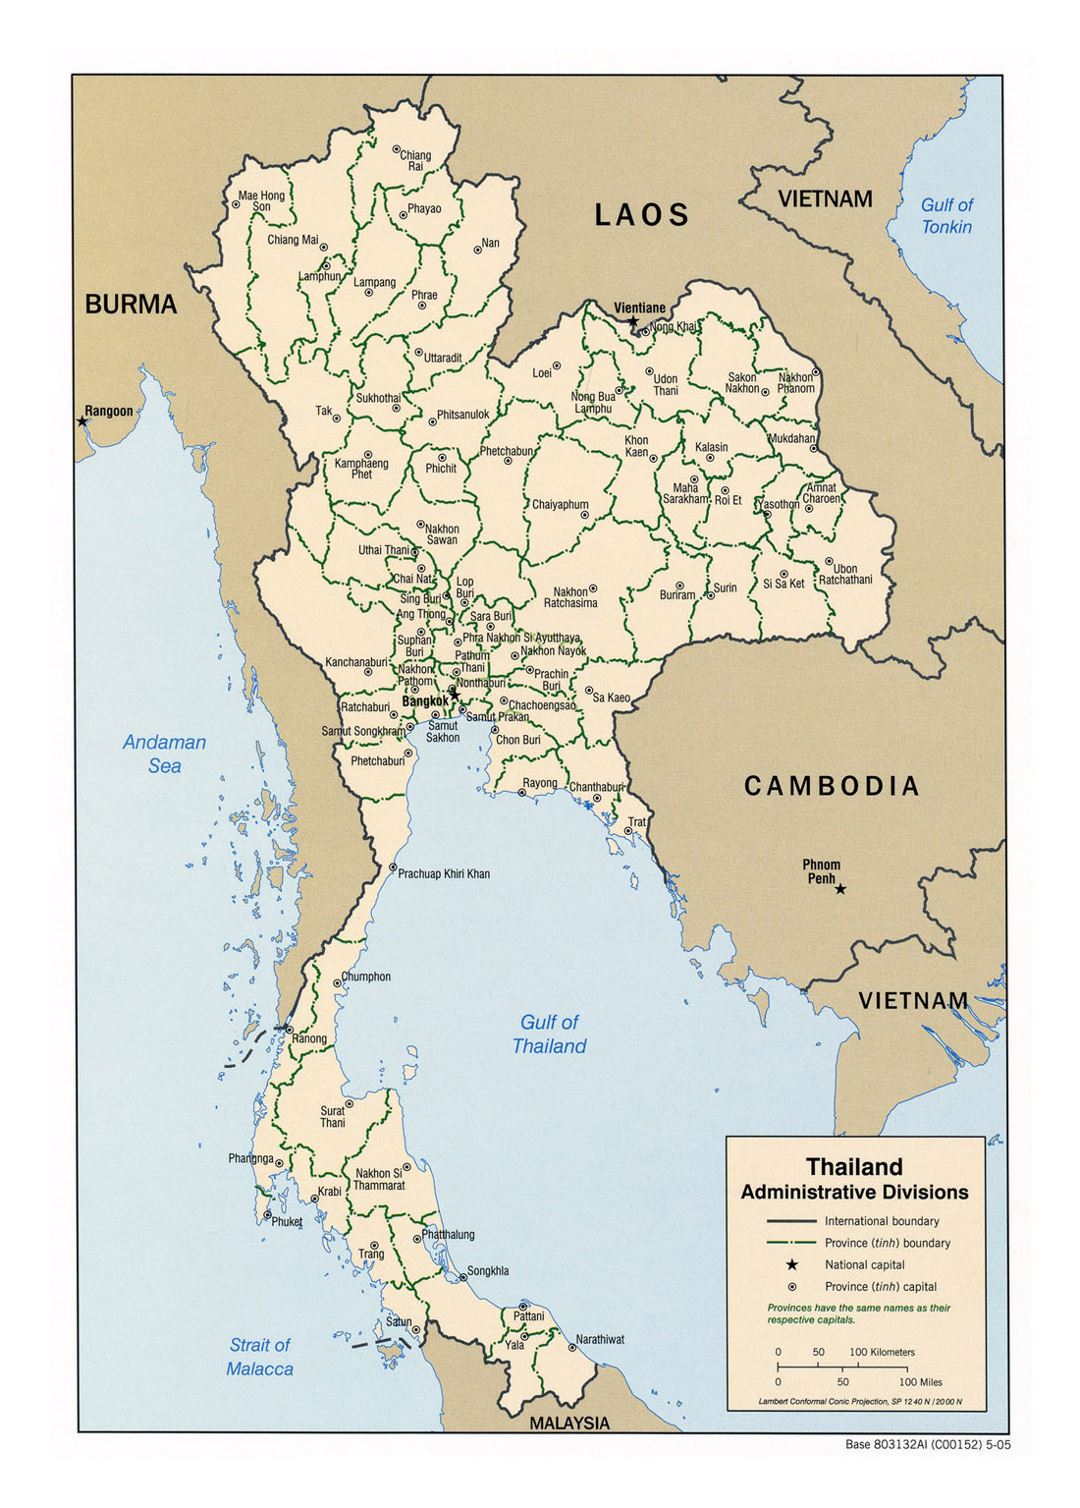 Detailed administrative divisions map of Thailand - 2005